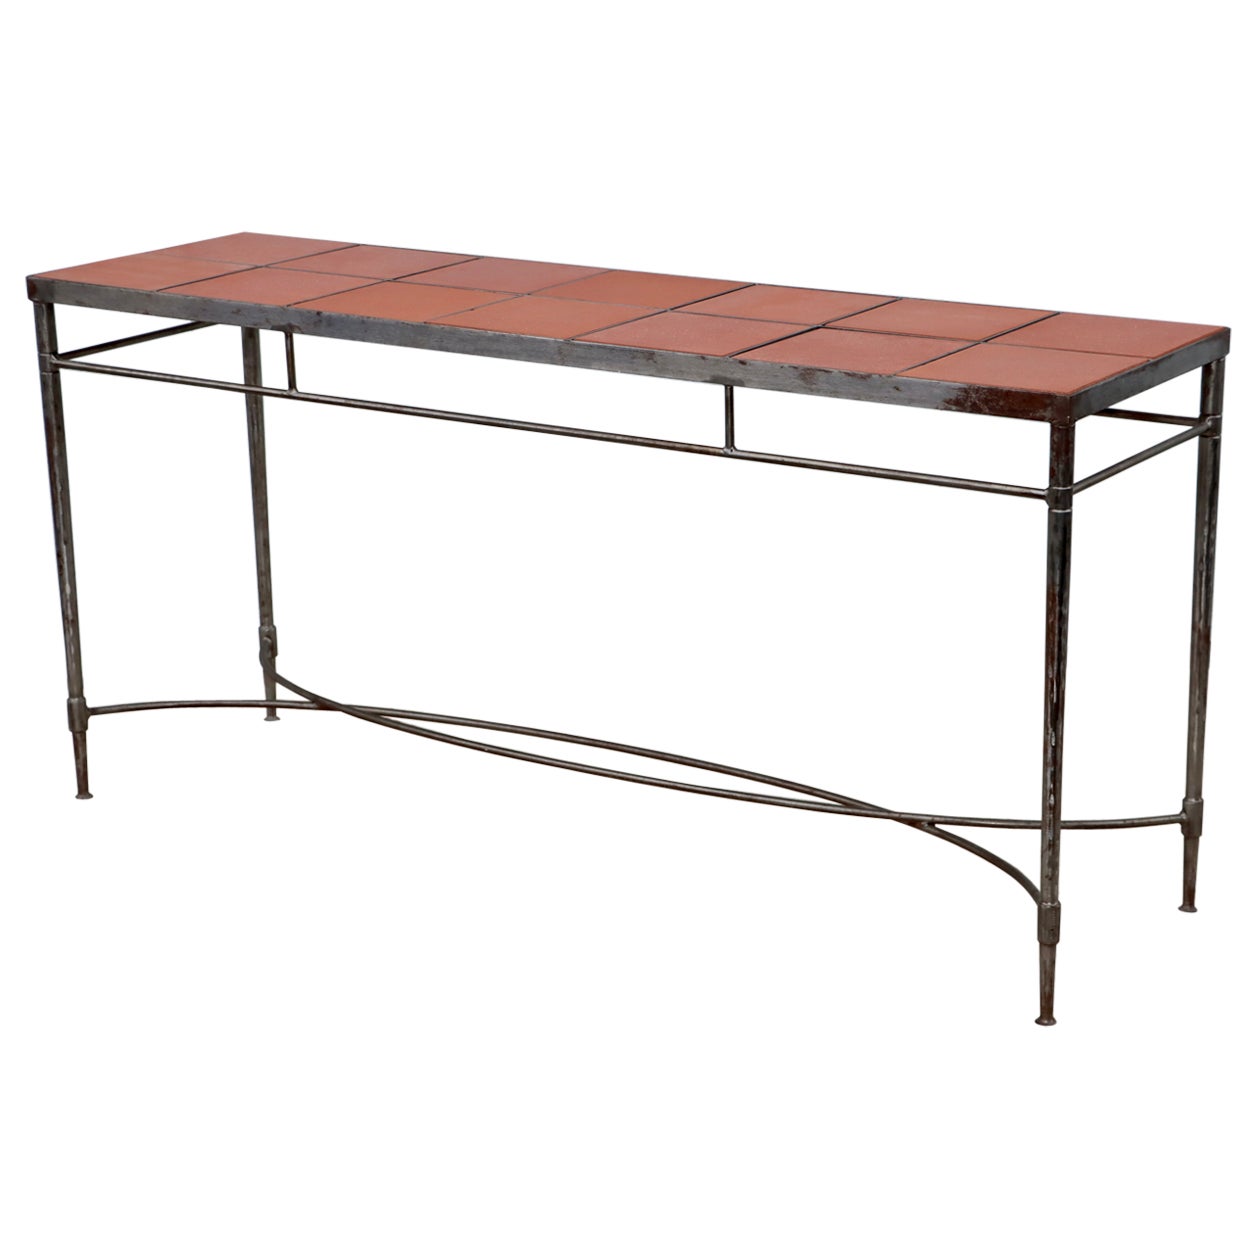 1970's Italian Iron Console Table with Impruneta Terracotta Tile Inserts For Sale